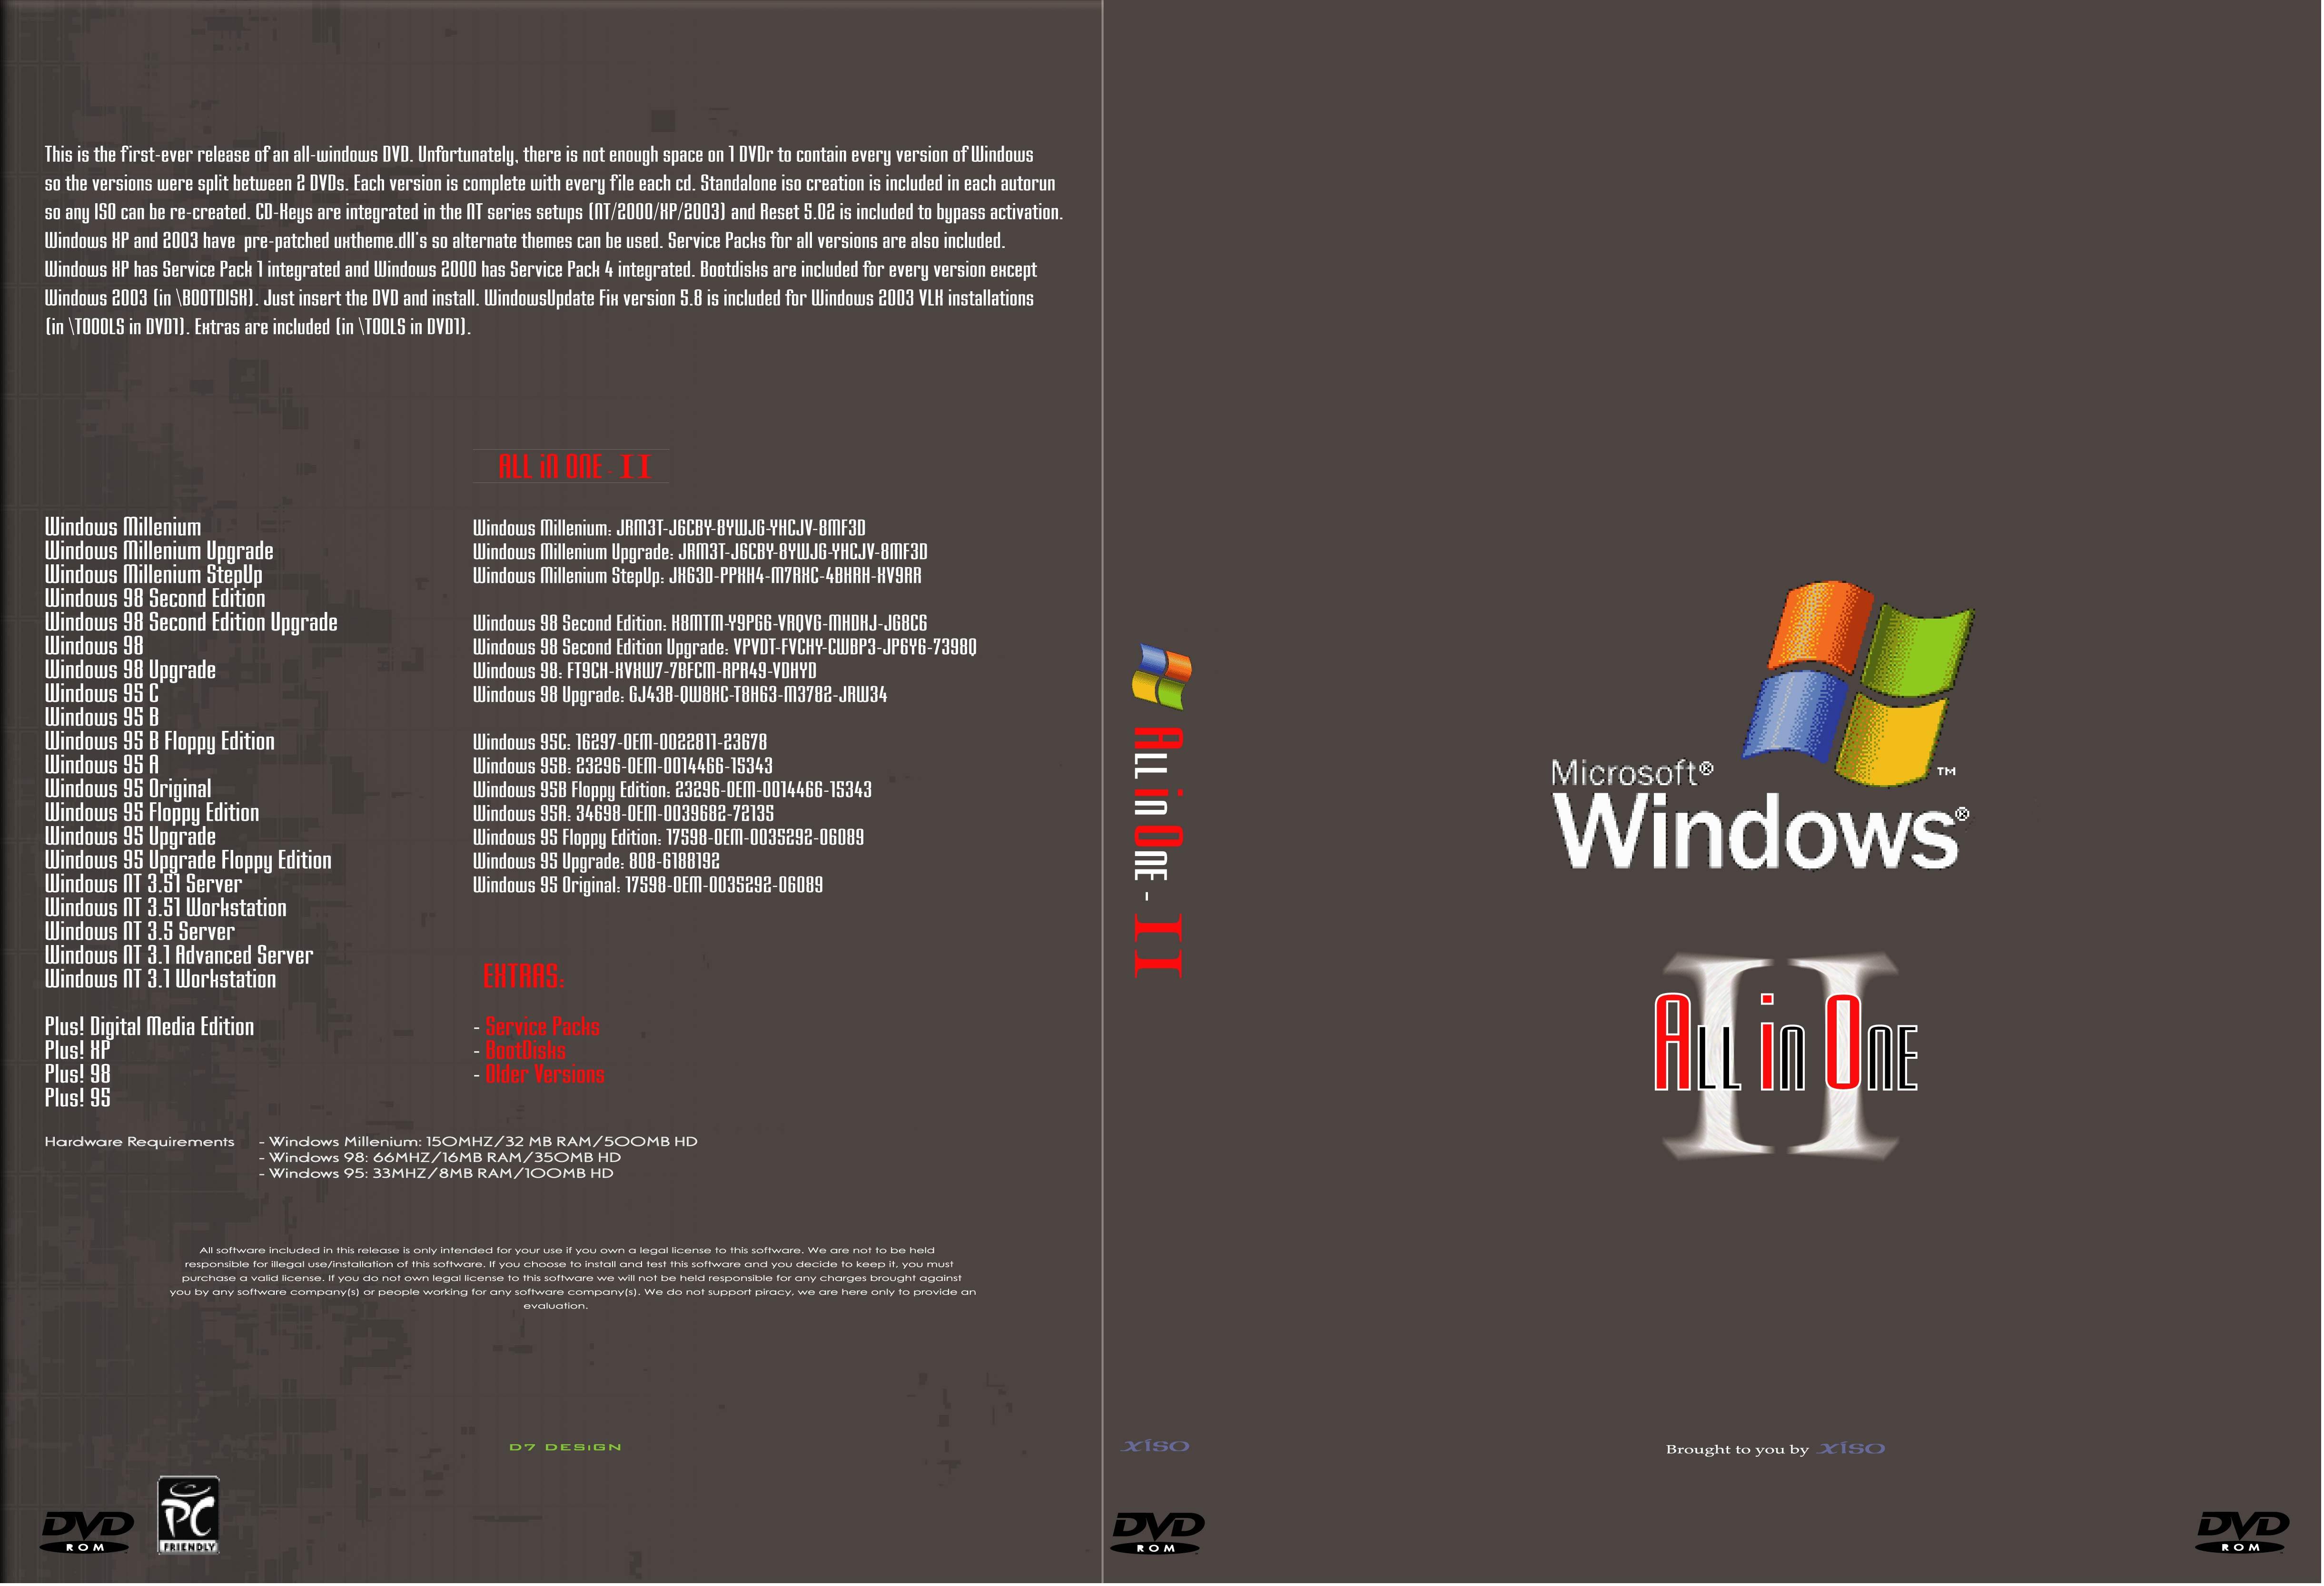 Download windows 95 iso image